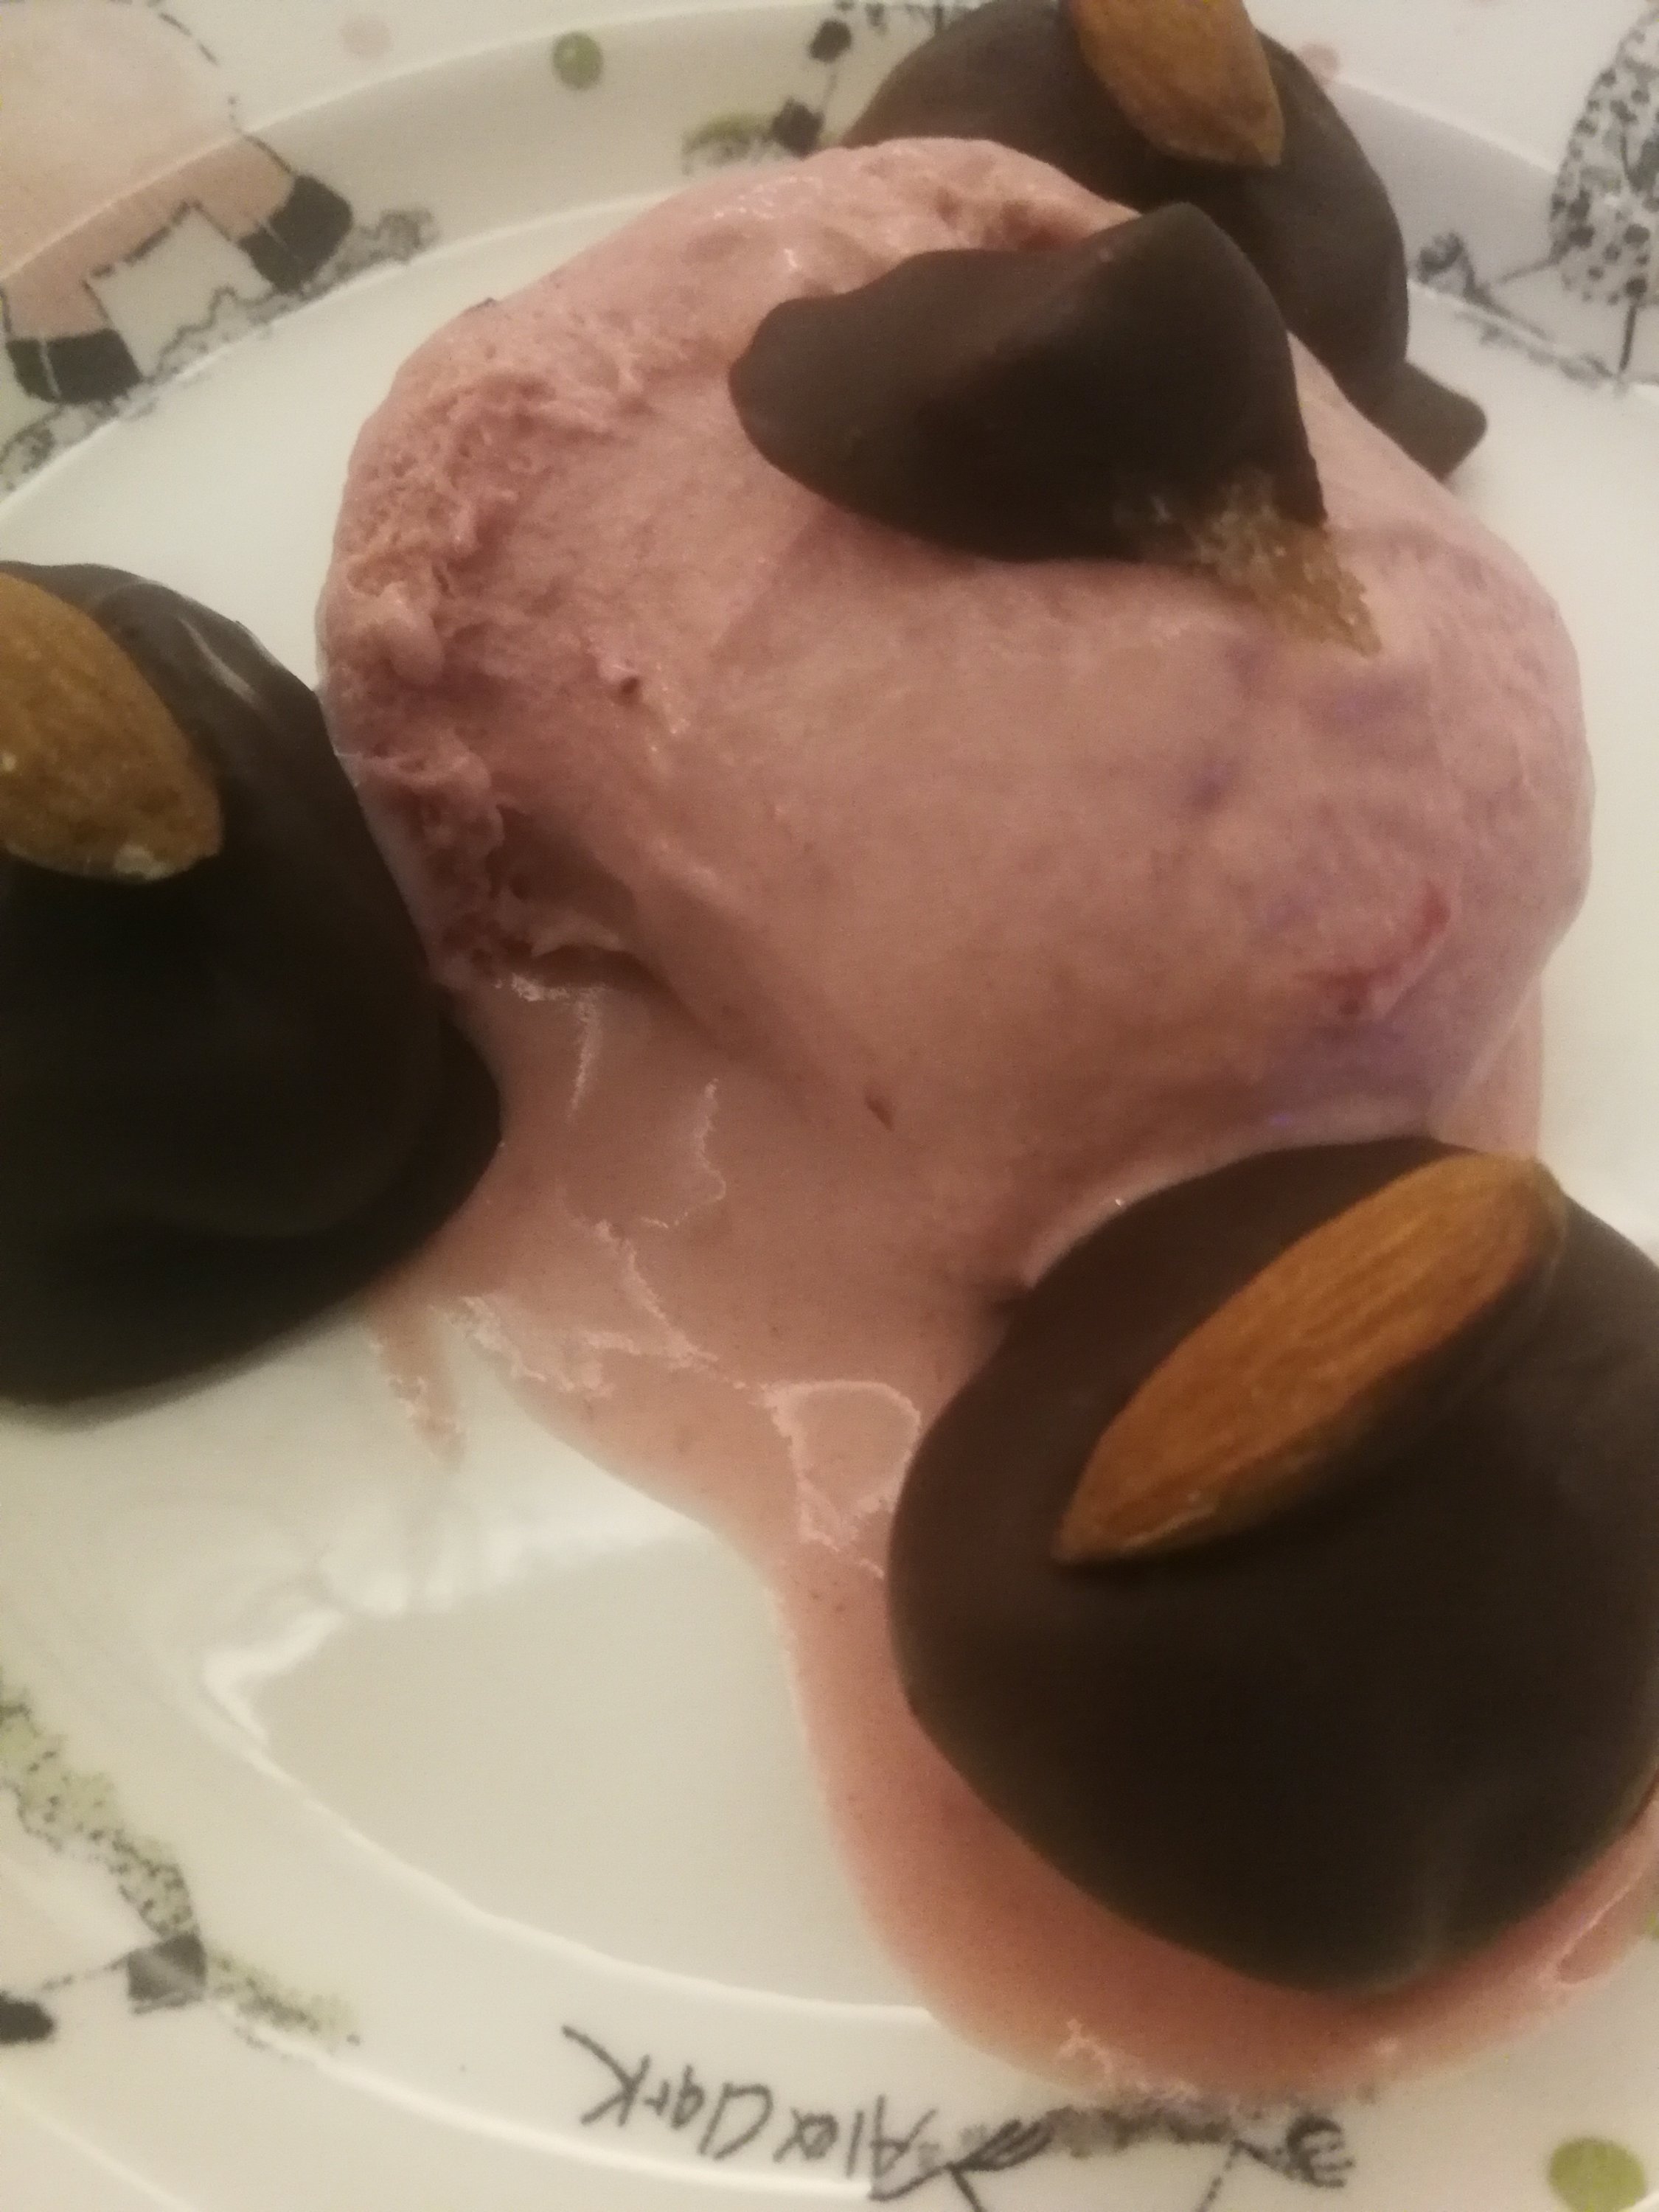 Baked figs stuffed with almond and crystallized ginger, dipped in chocolate with strawberry gelato